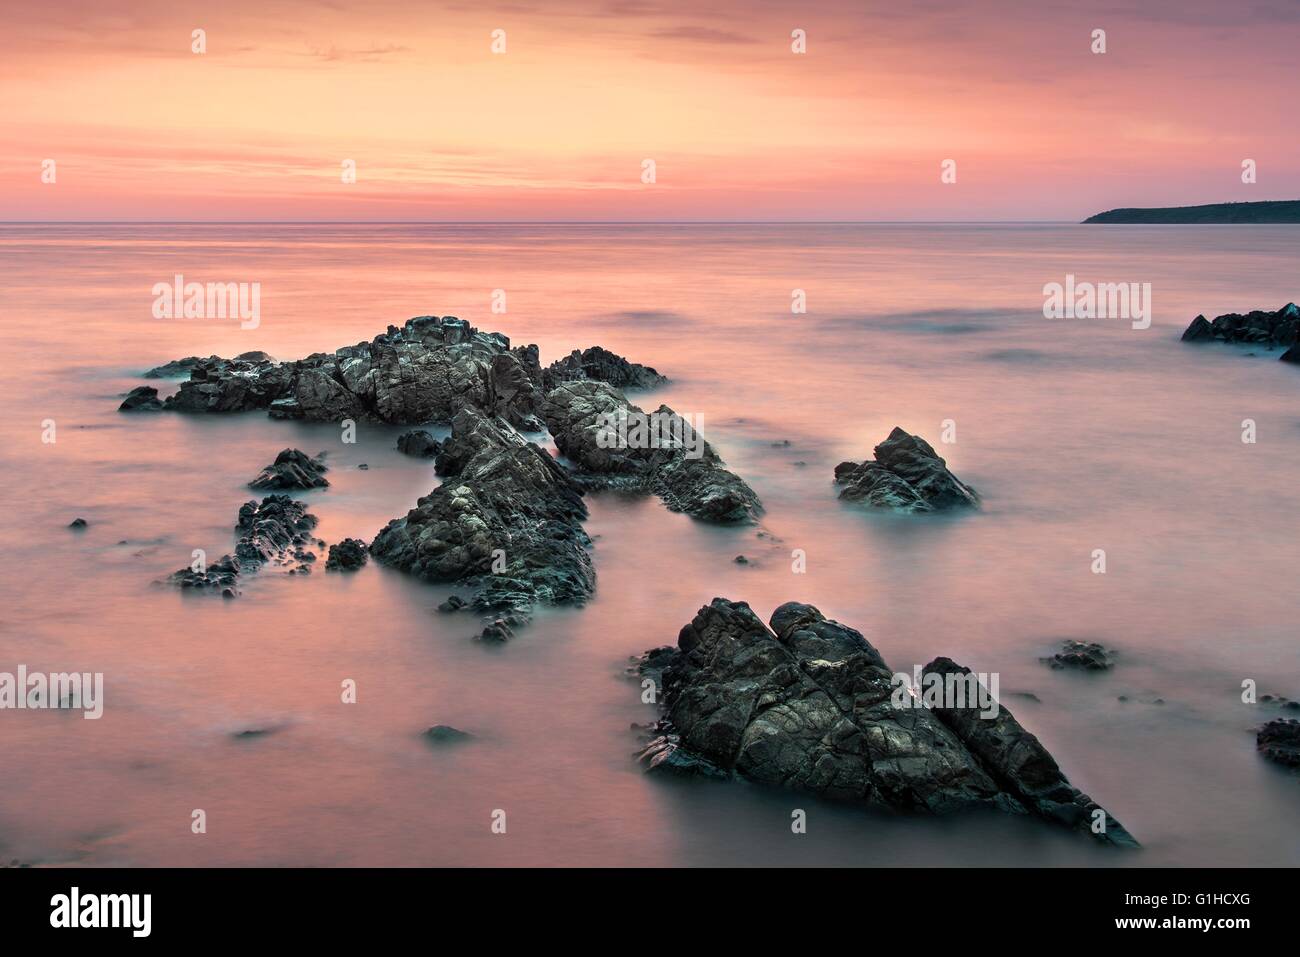 Colorful sunrise over the sea viewed from the beach rocks Stock Photo